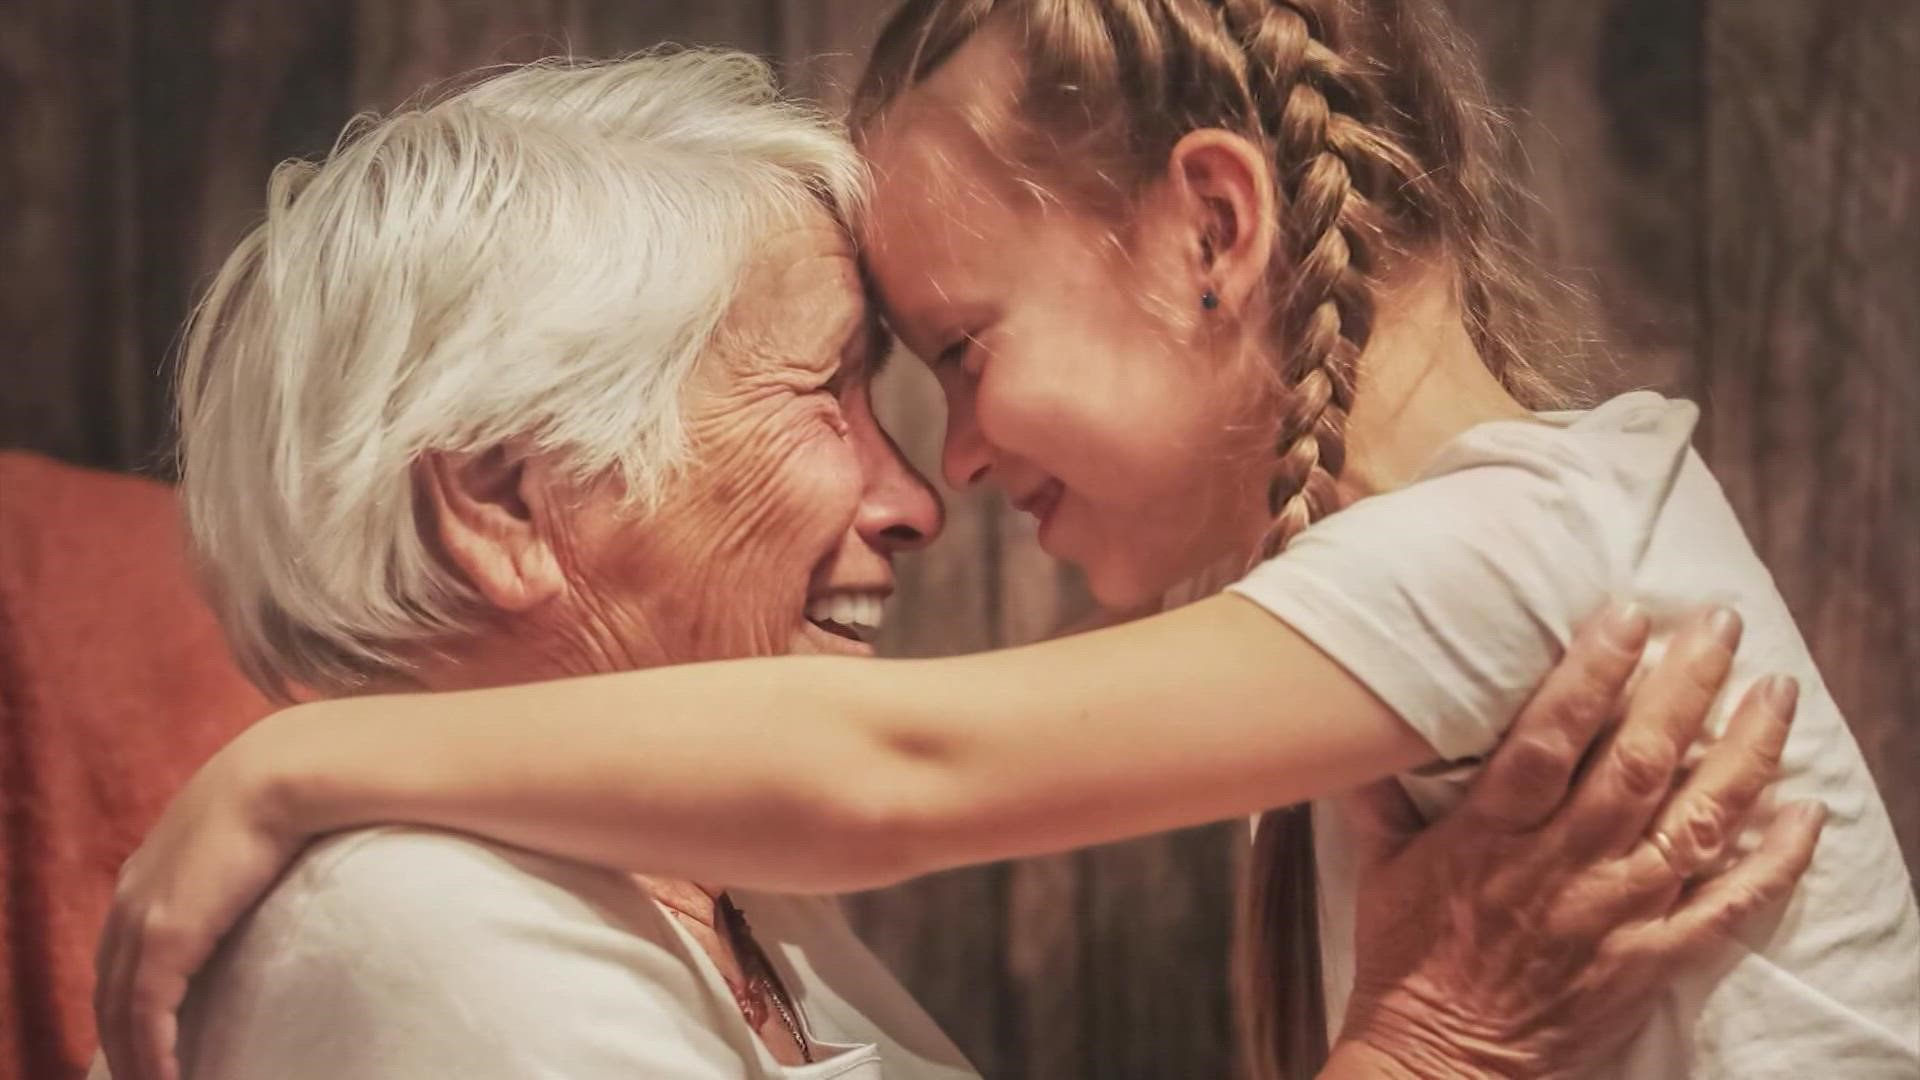 The idea that grandmas are more affectionate with their grandchildren than their own children is not new. But now scientists have actually put it to the test.